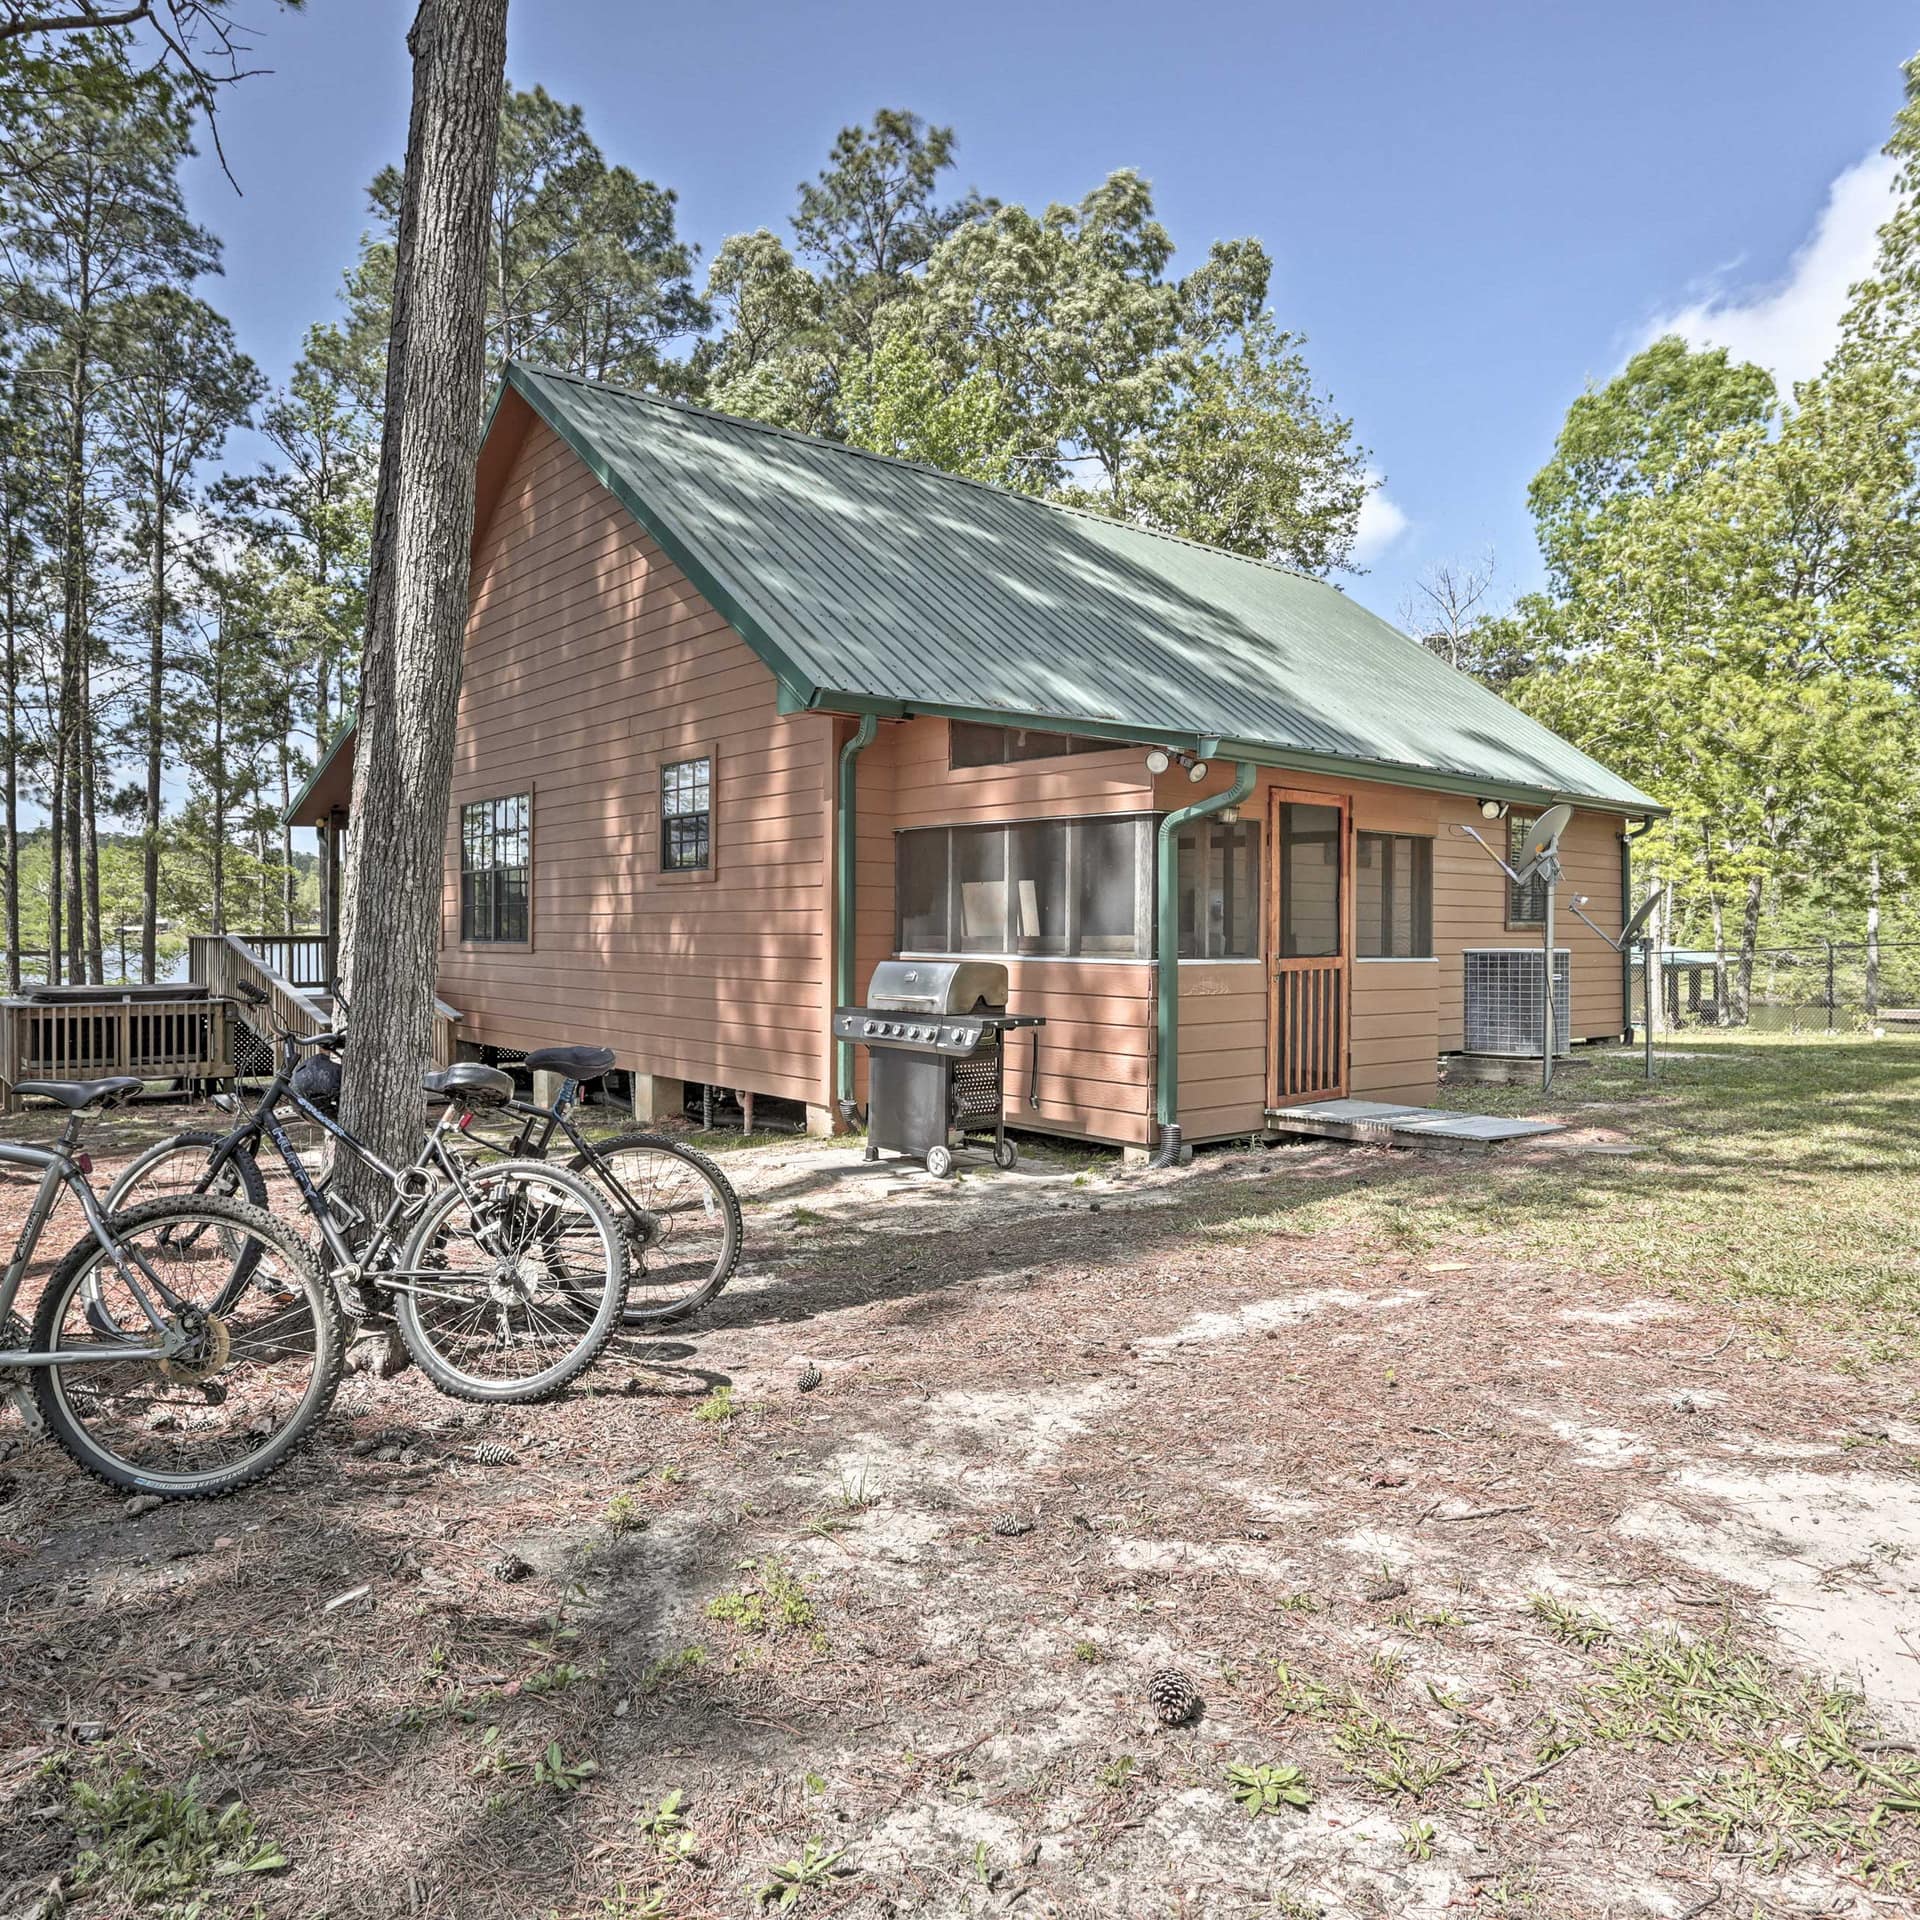 Bikes rest on pine trees outside a pink-tinted cottage in Texas